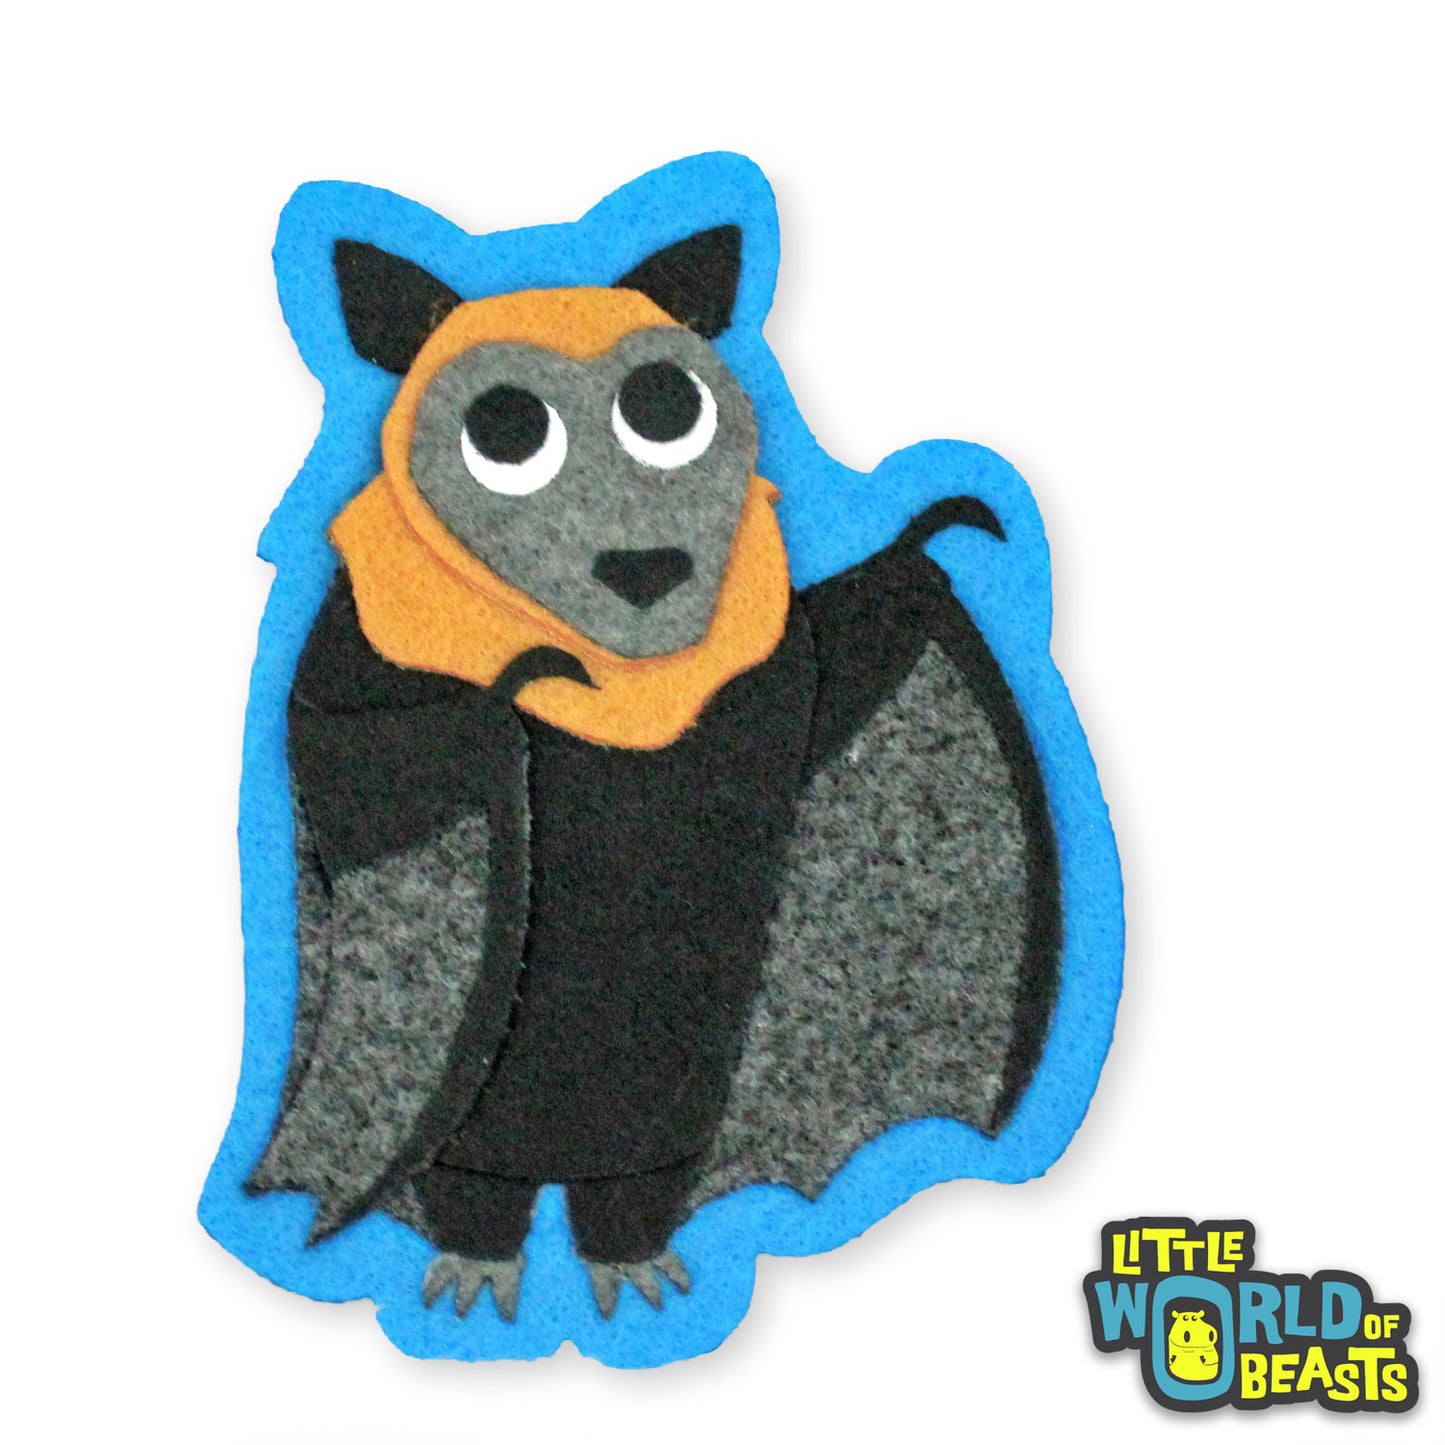 Ginger the Flying Fox Patch - Iron On or Sew On Patch - Little World of Beasts